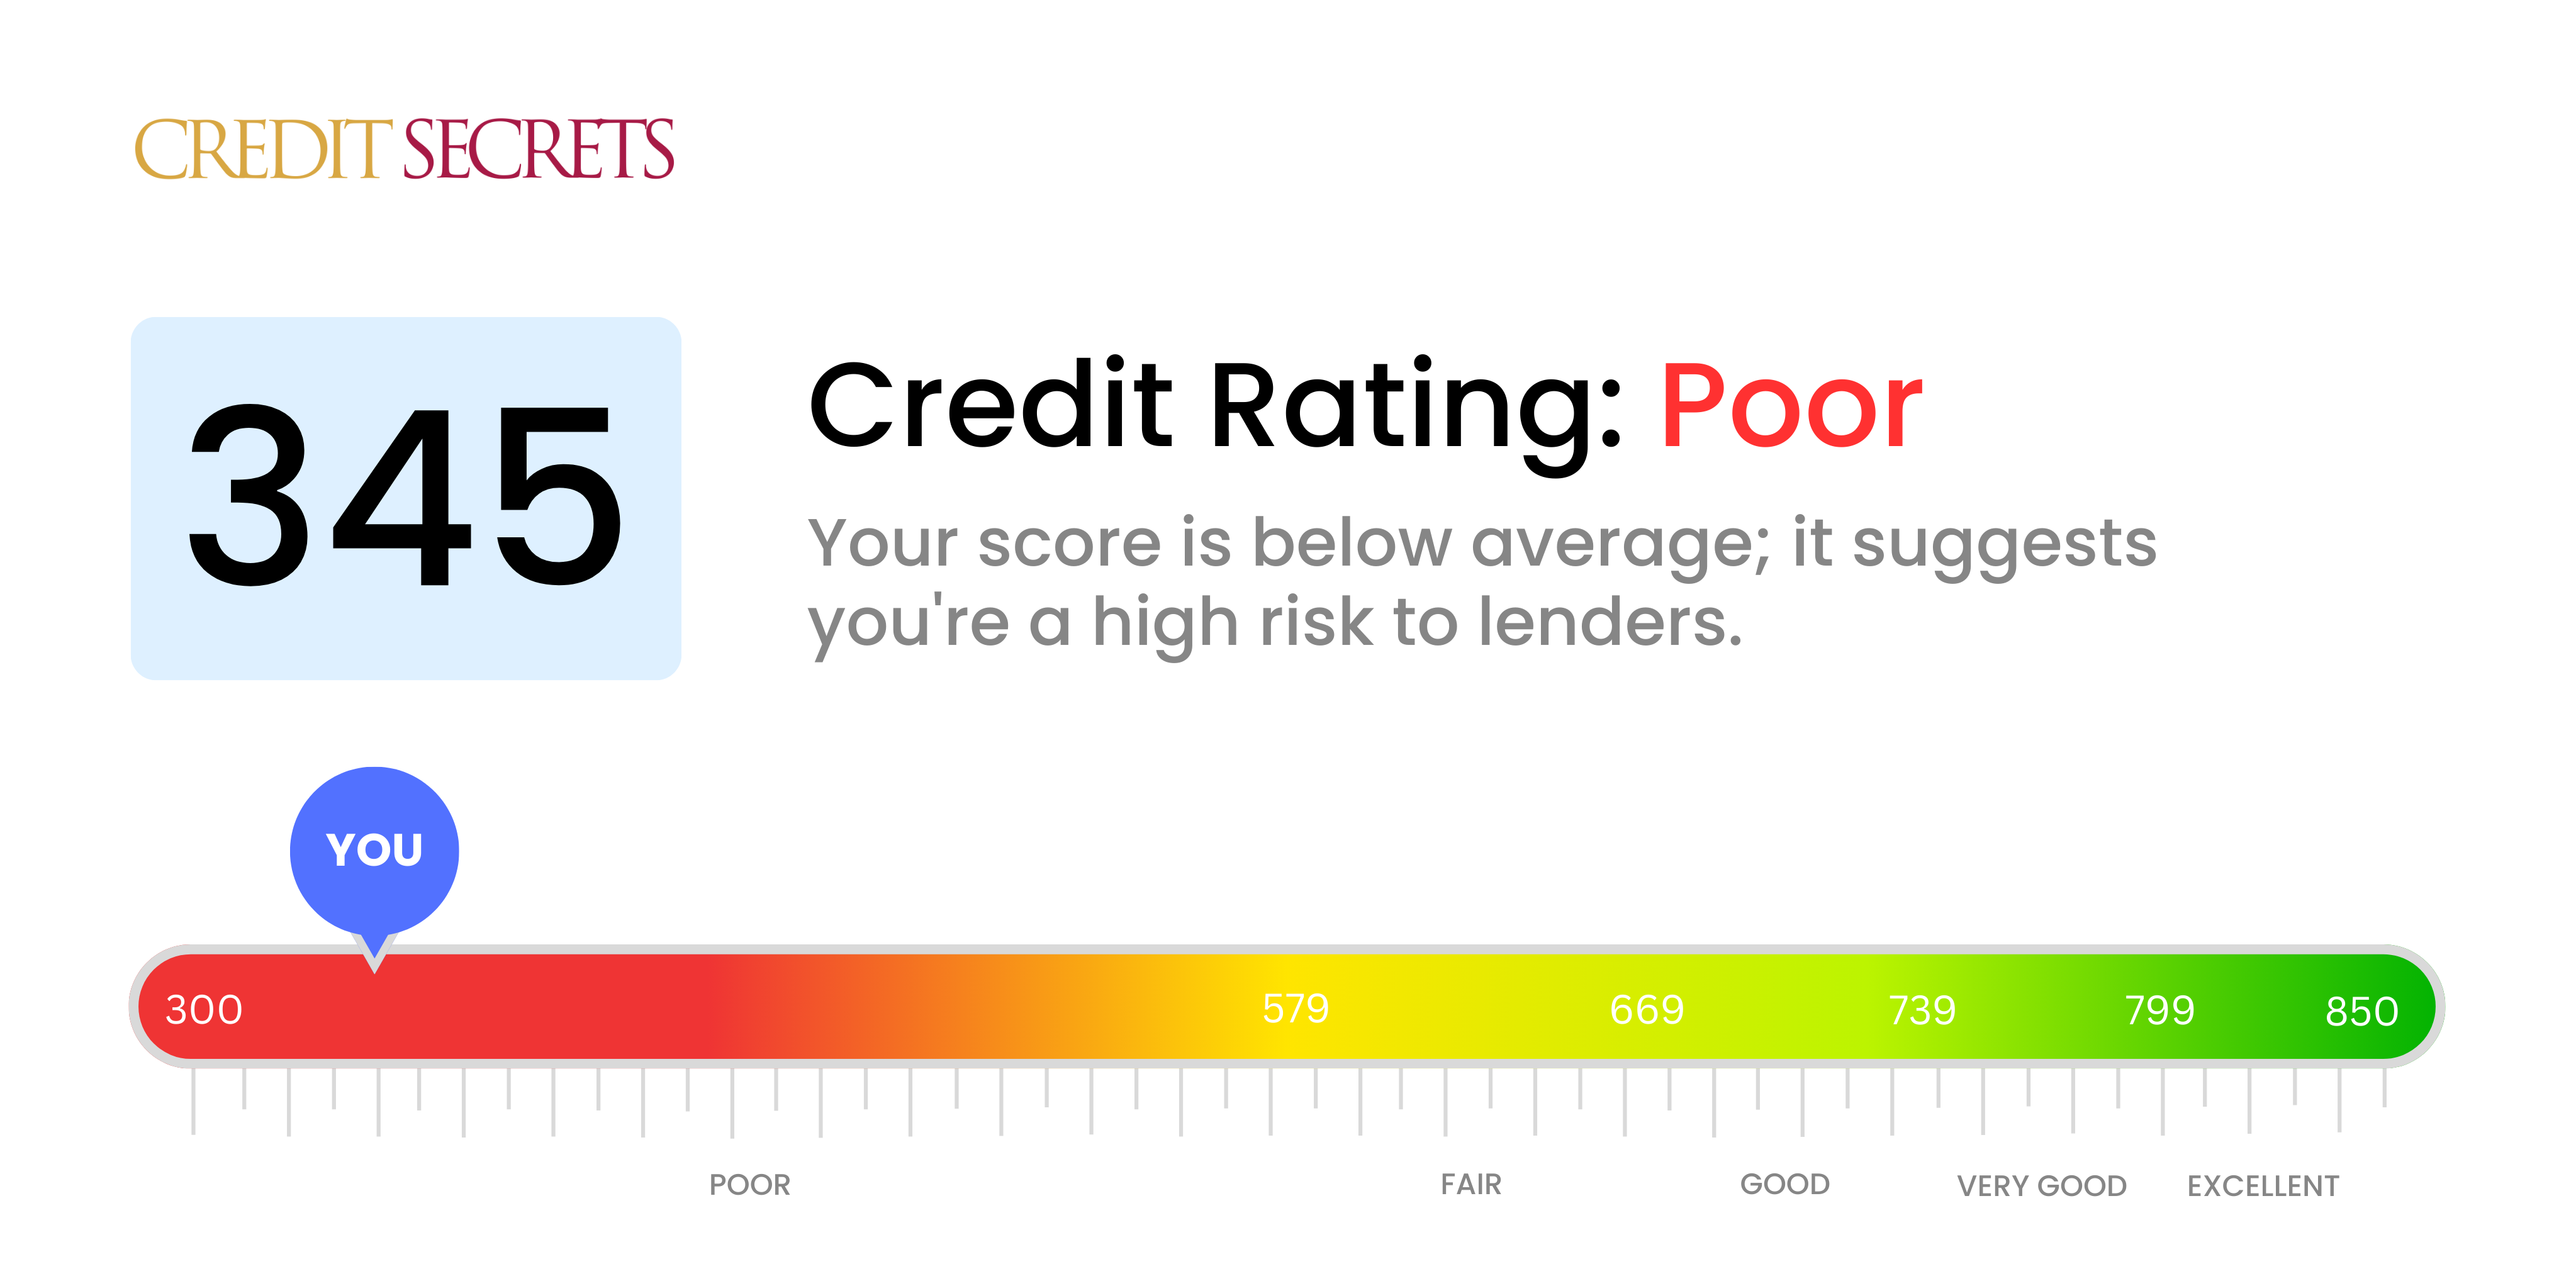 Is 345 a good credit score?